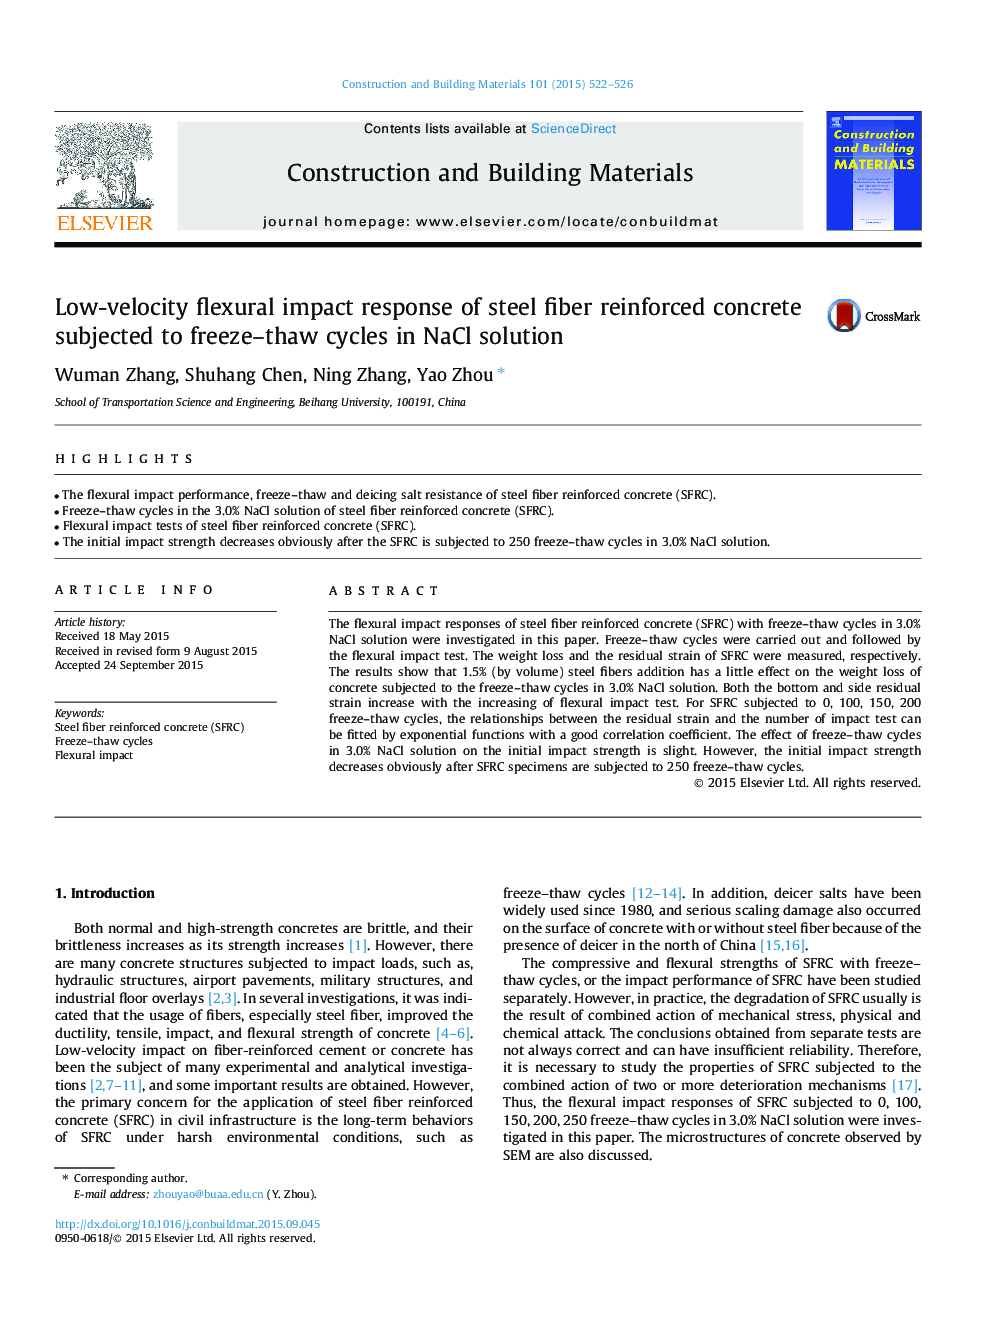 Low-velocity flexural impact response of steel fiber reinforced concrete subjected to freeze–thaw cycles in NaCl solution